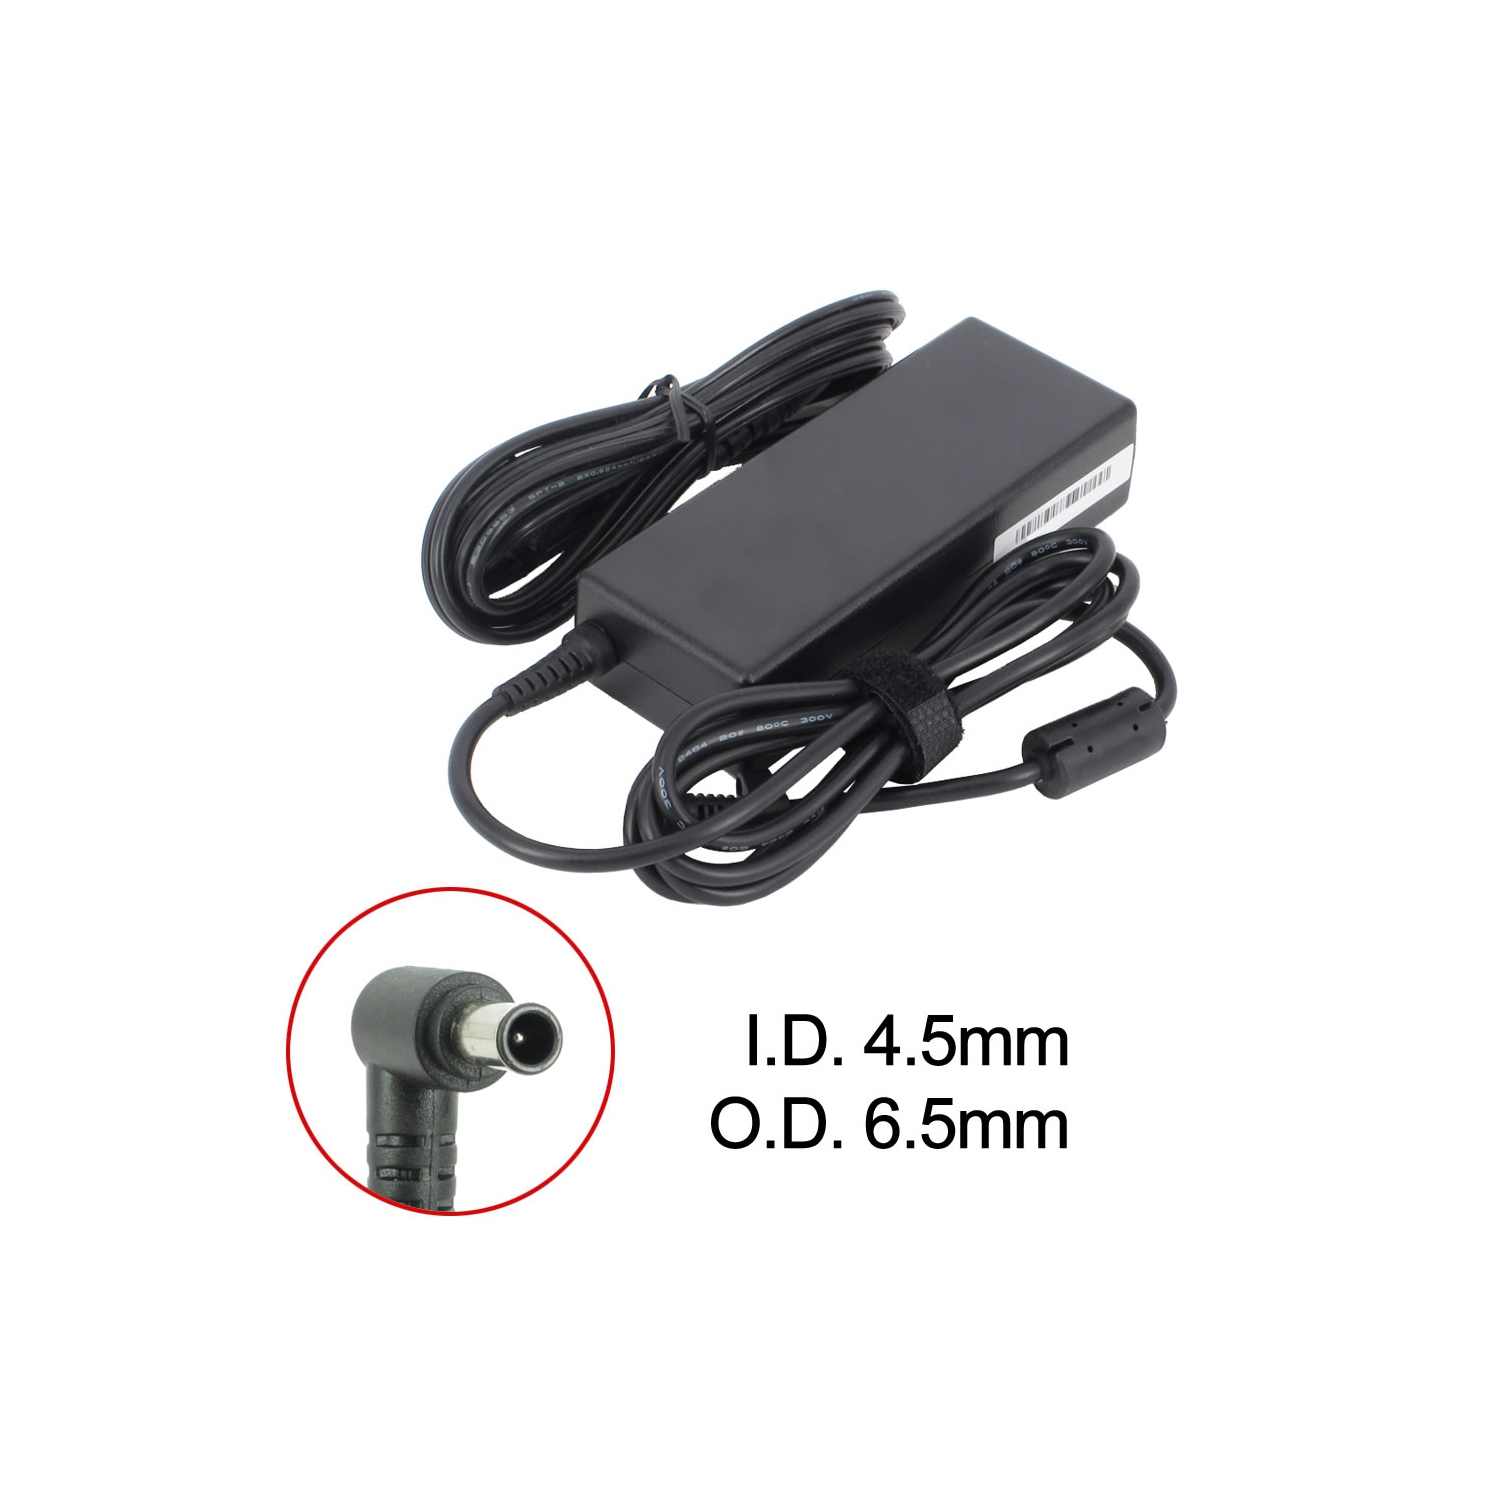 Brand New Laptop AC Adapter for Sony VAIO VGN-BX575 Series, PCGA-AC19V1, PCGA-AC19V23, VGP-AC19V19, VGP-AC19V27, VGP-AC19V48